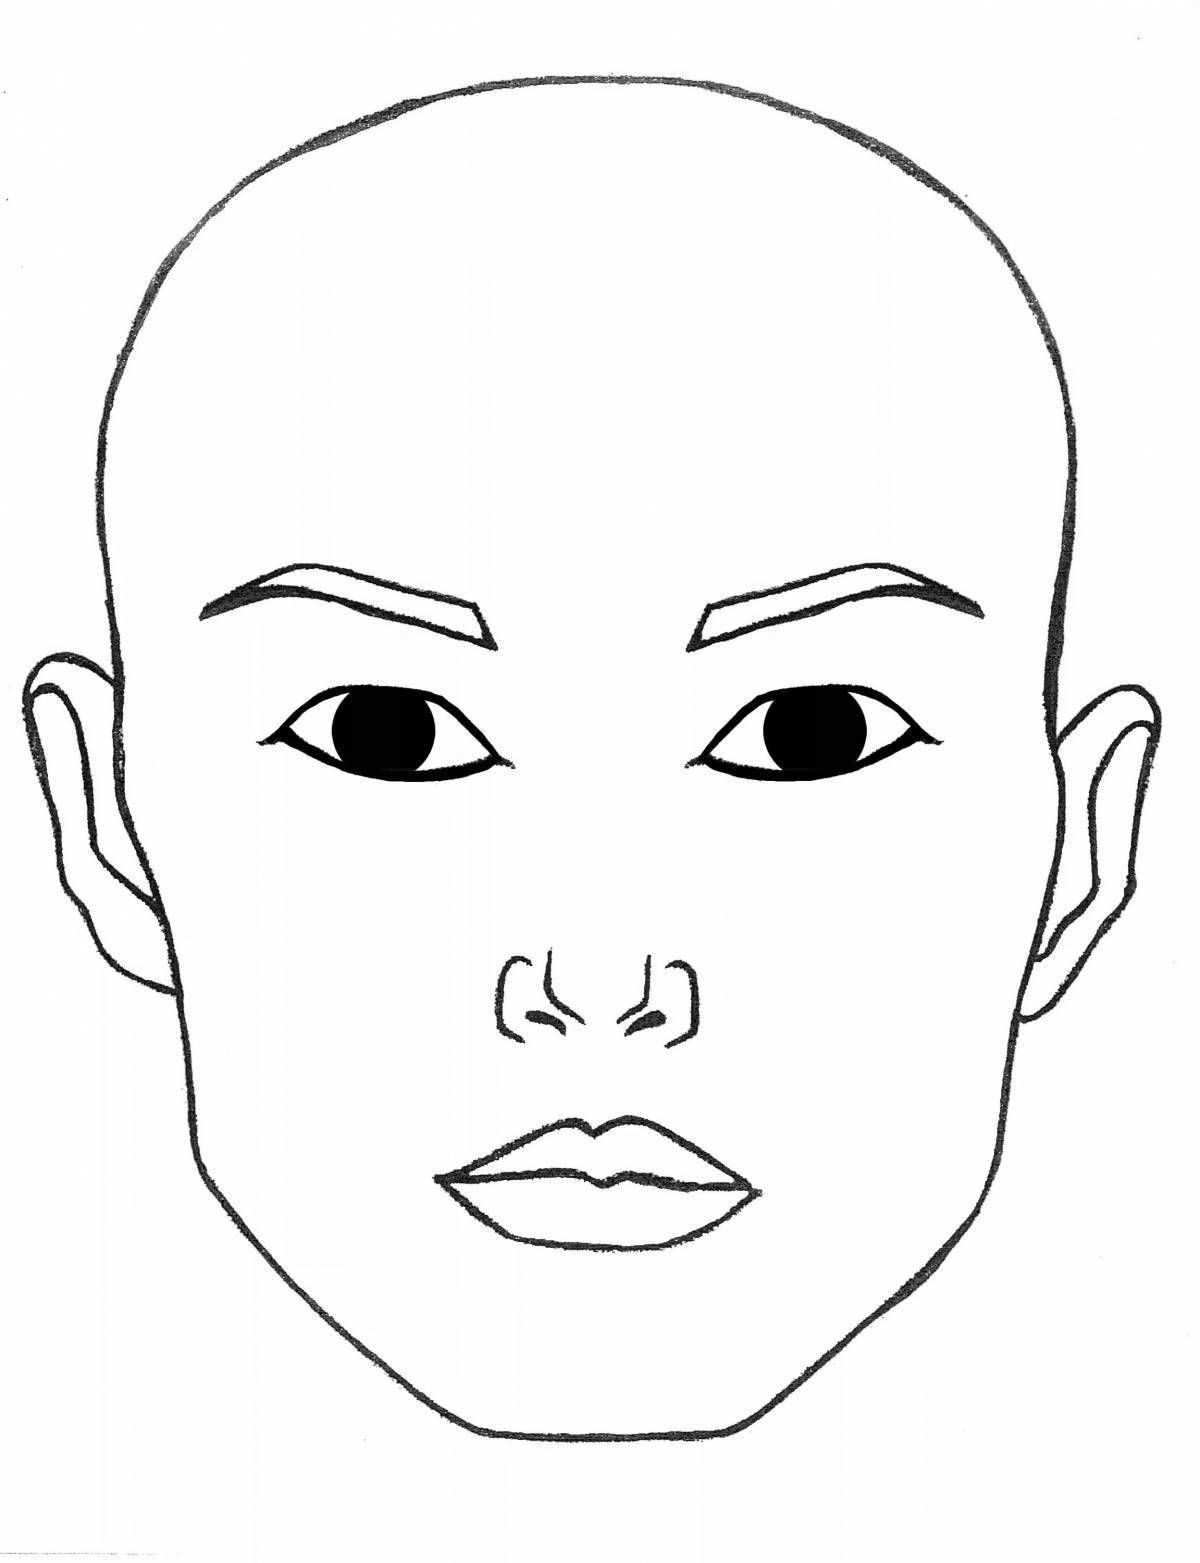 Exotic face coloring page